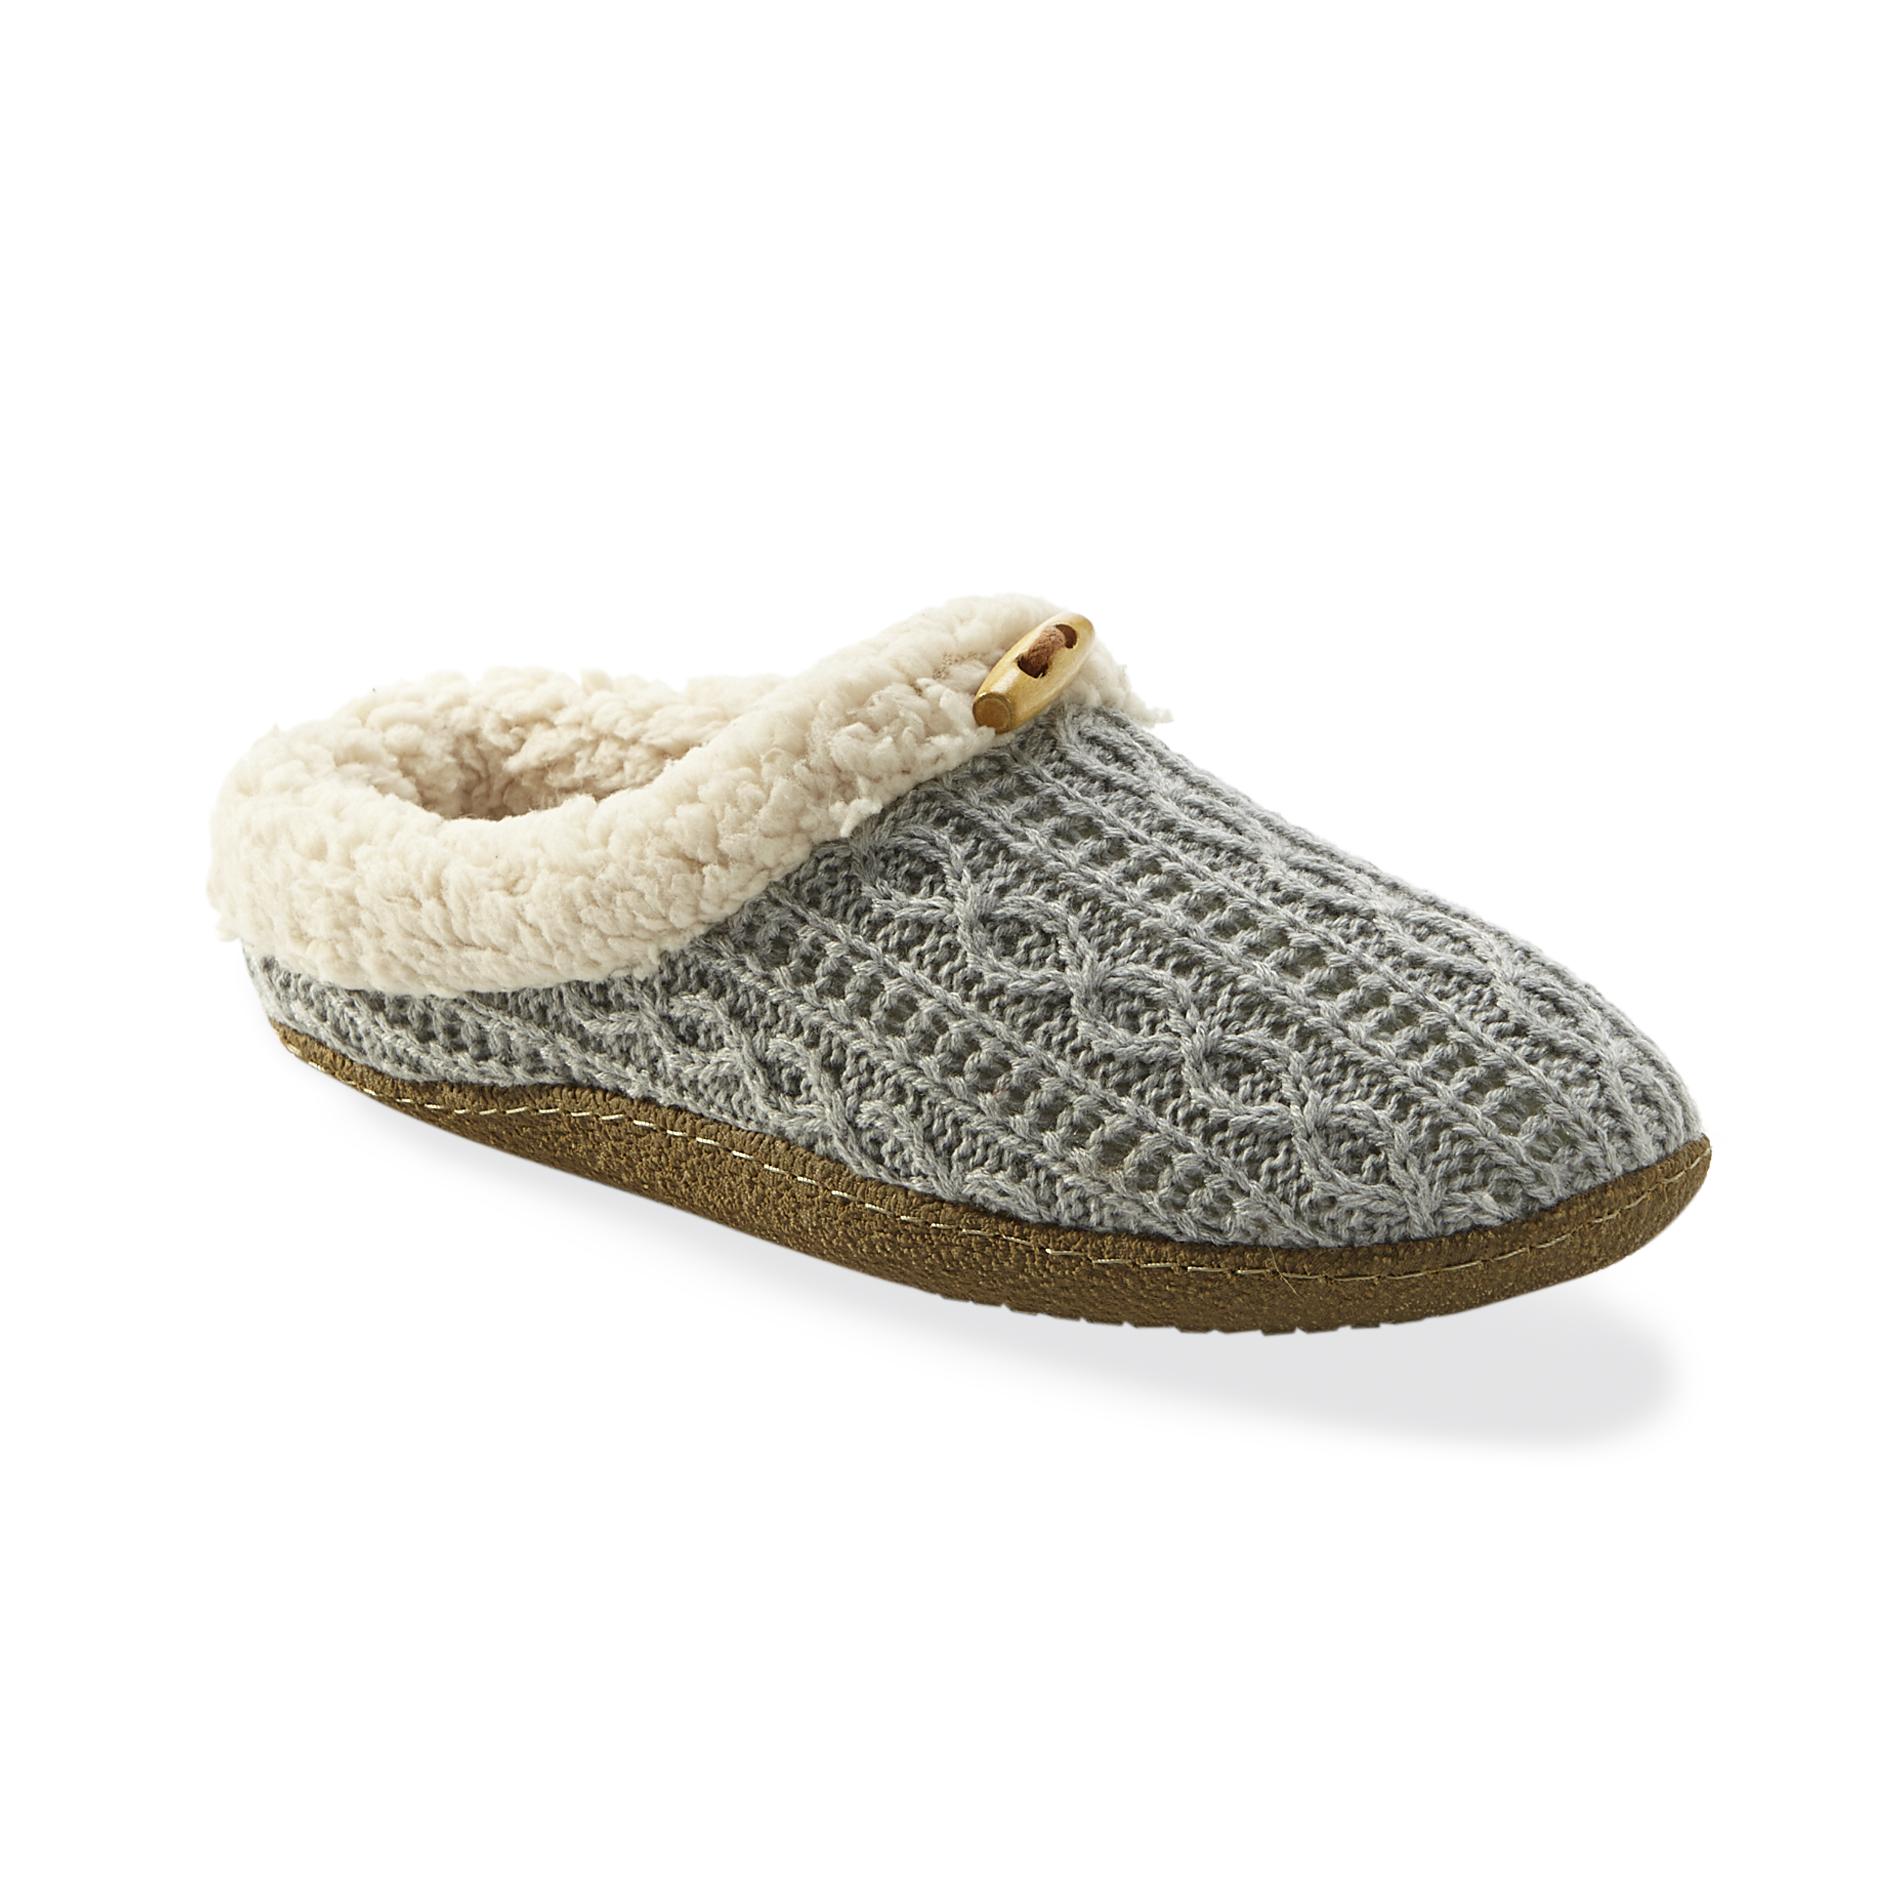 Women's Cable Knit Fleece Slippers: Casual and Comfortable at Sears